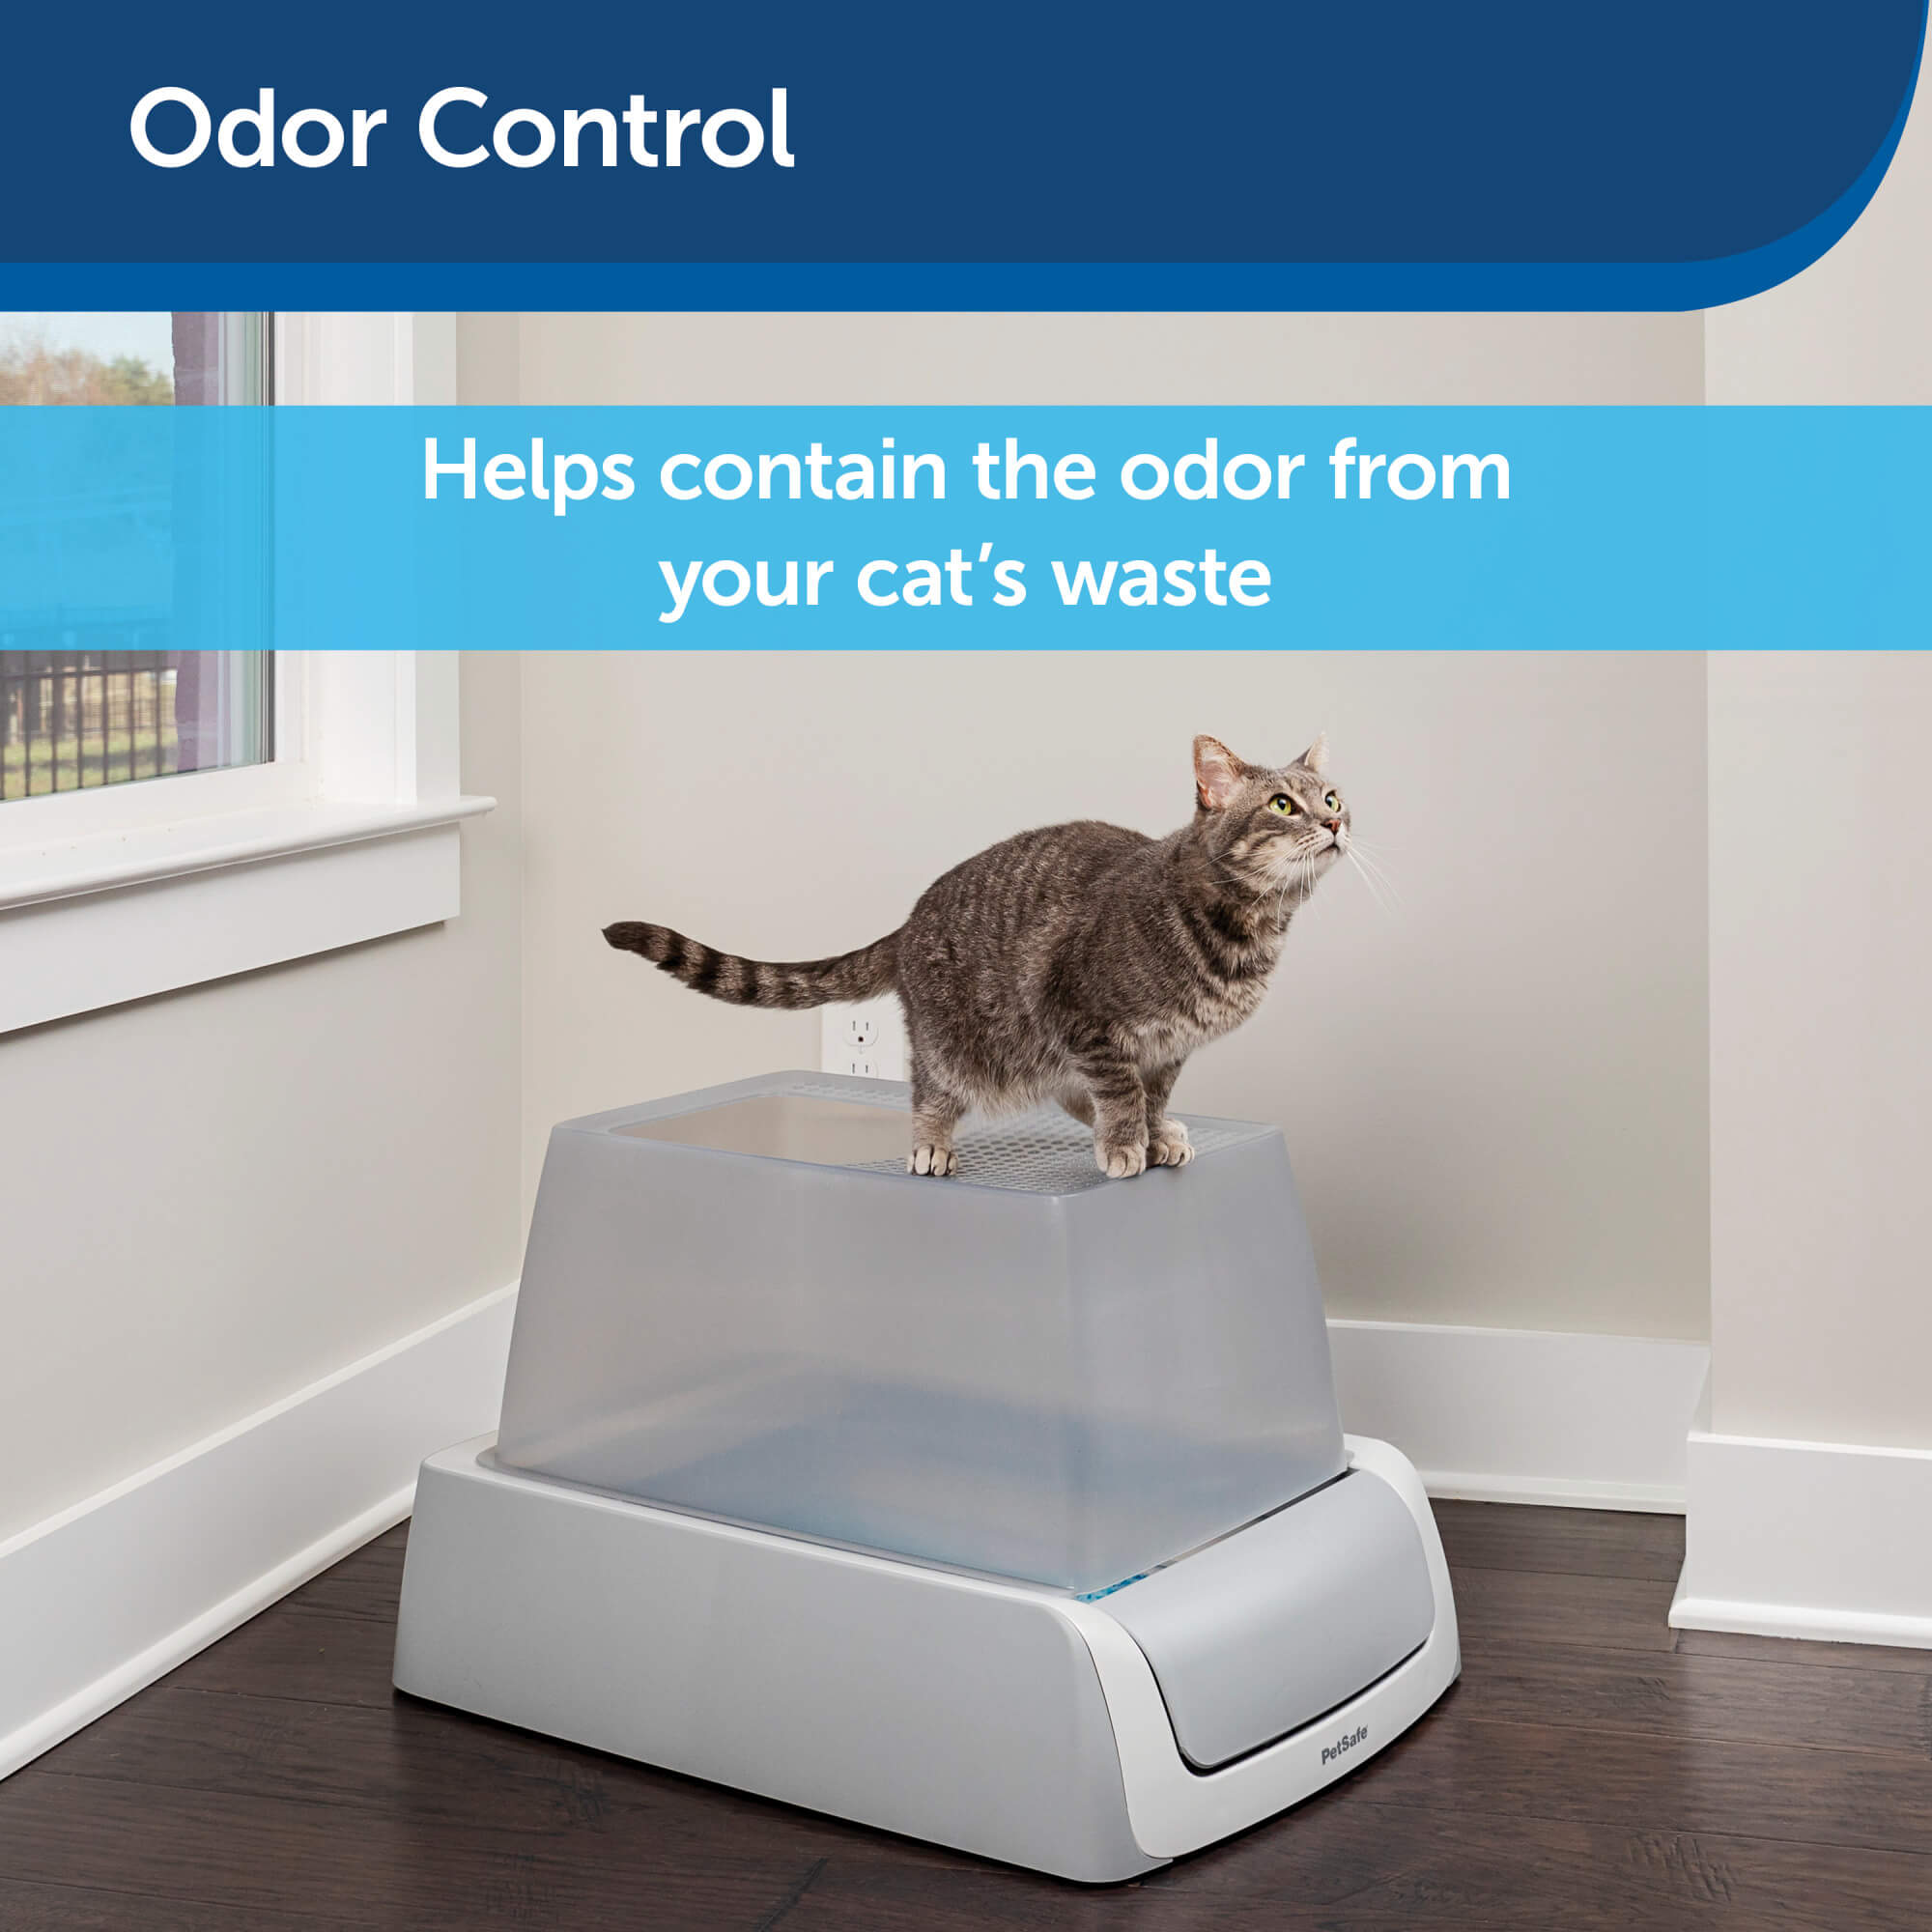 odor control help contain cat odor cat on top of litter box